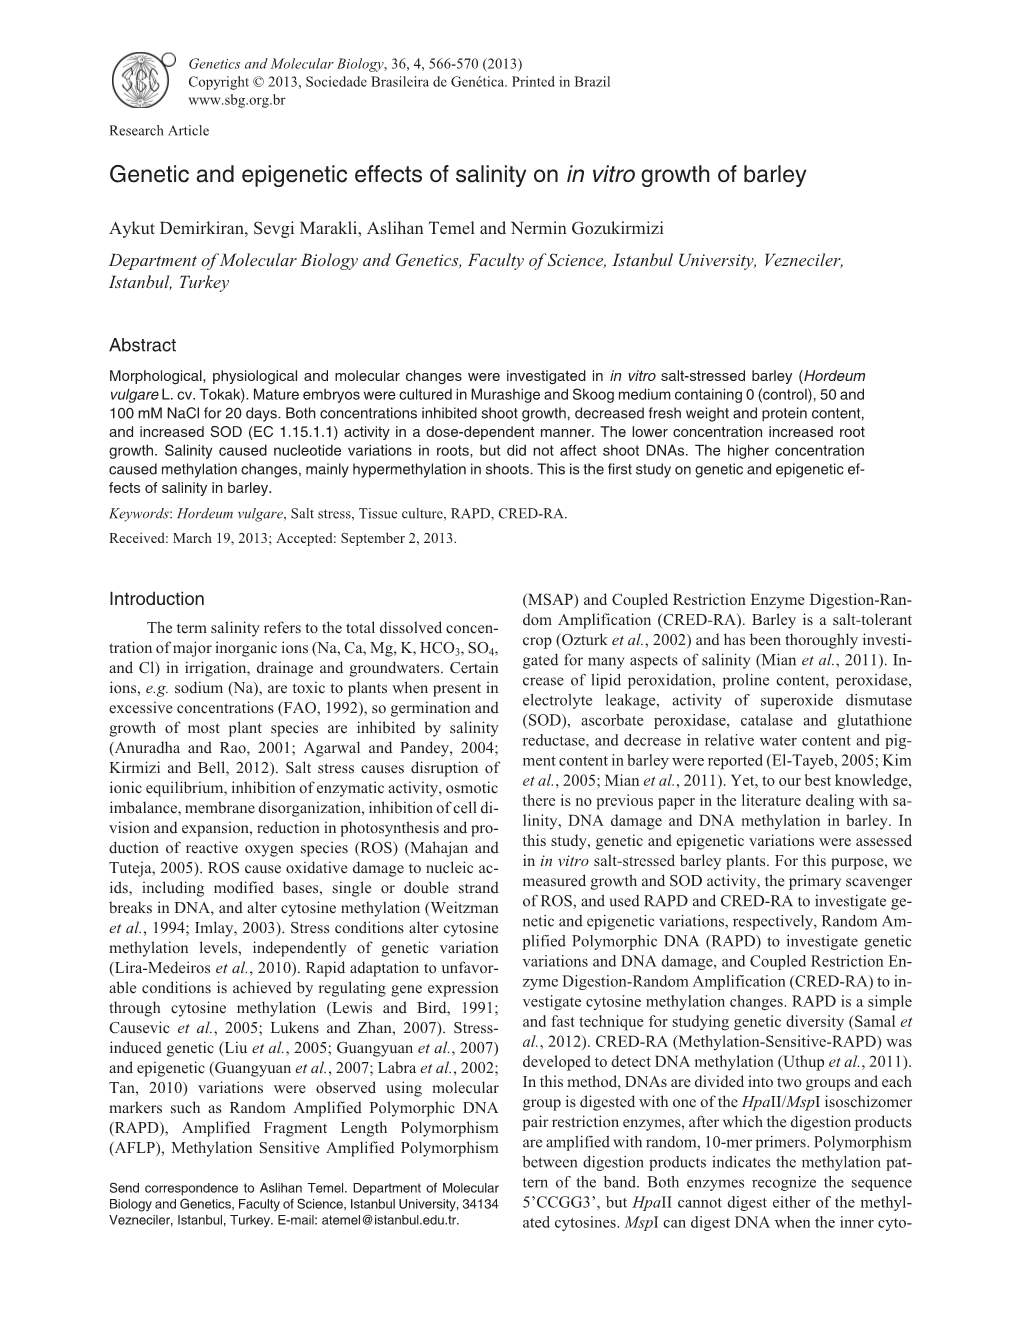 Genetic and Epigenetic Effects of Salinity on in Vitro Growth of Barley